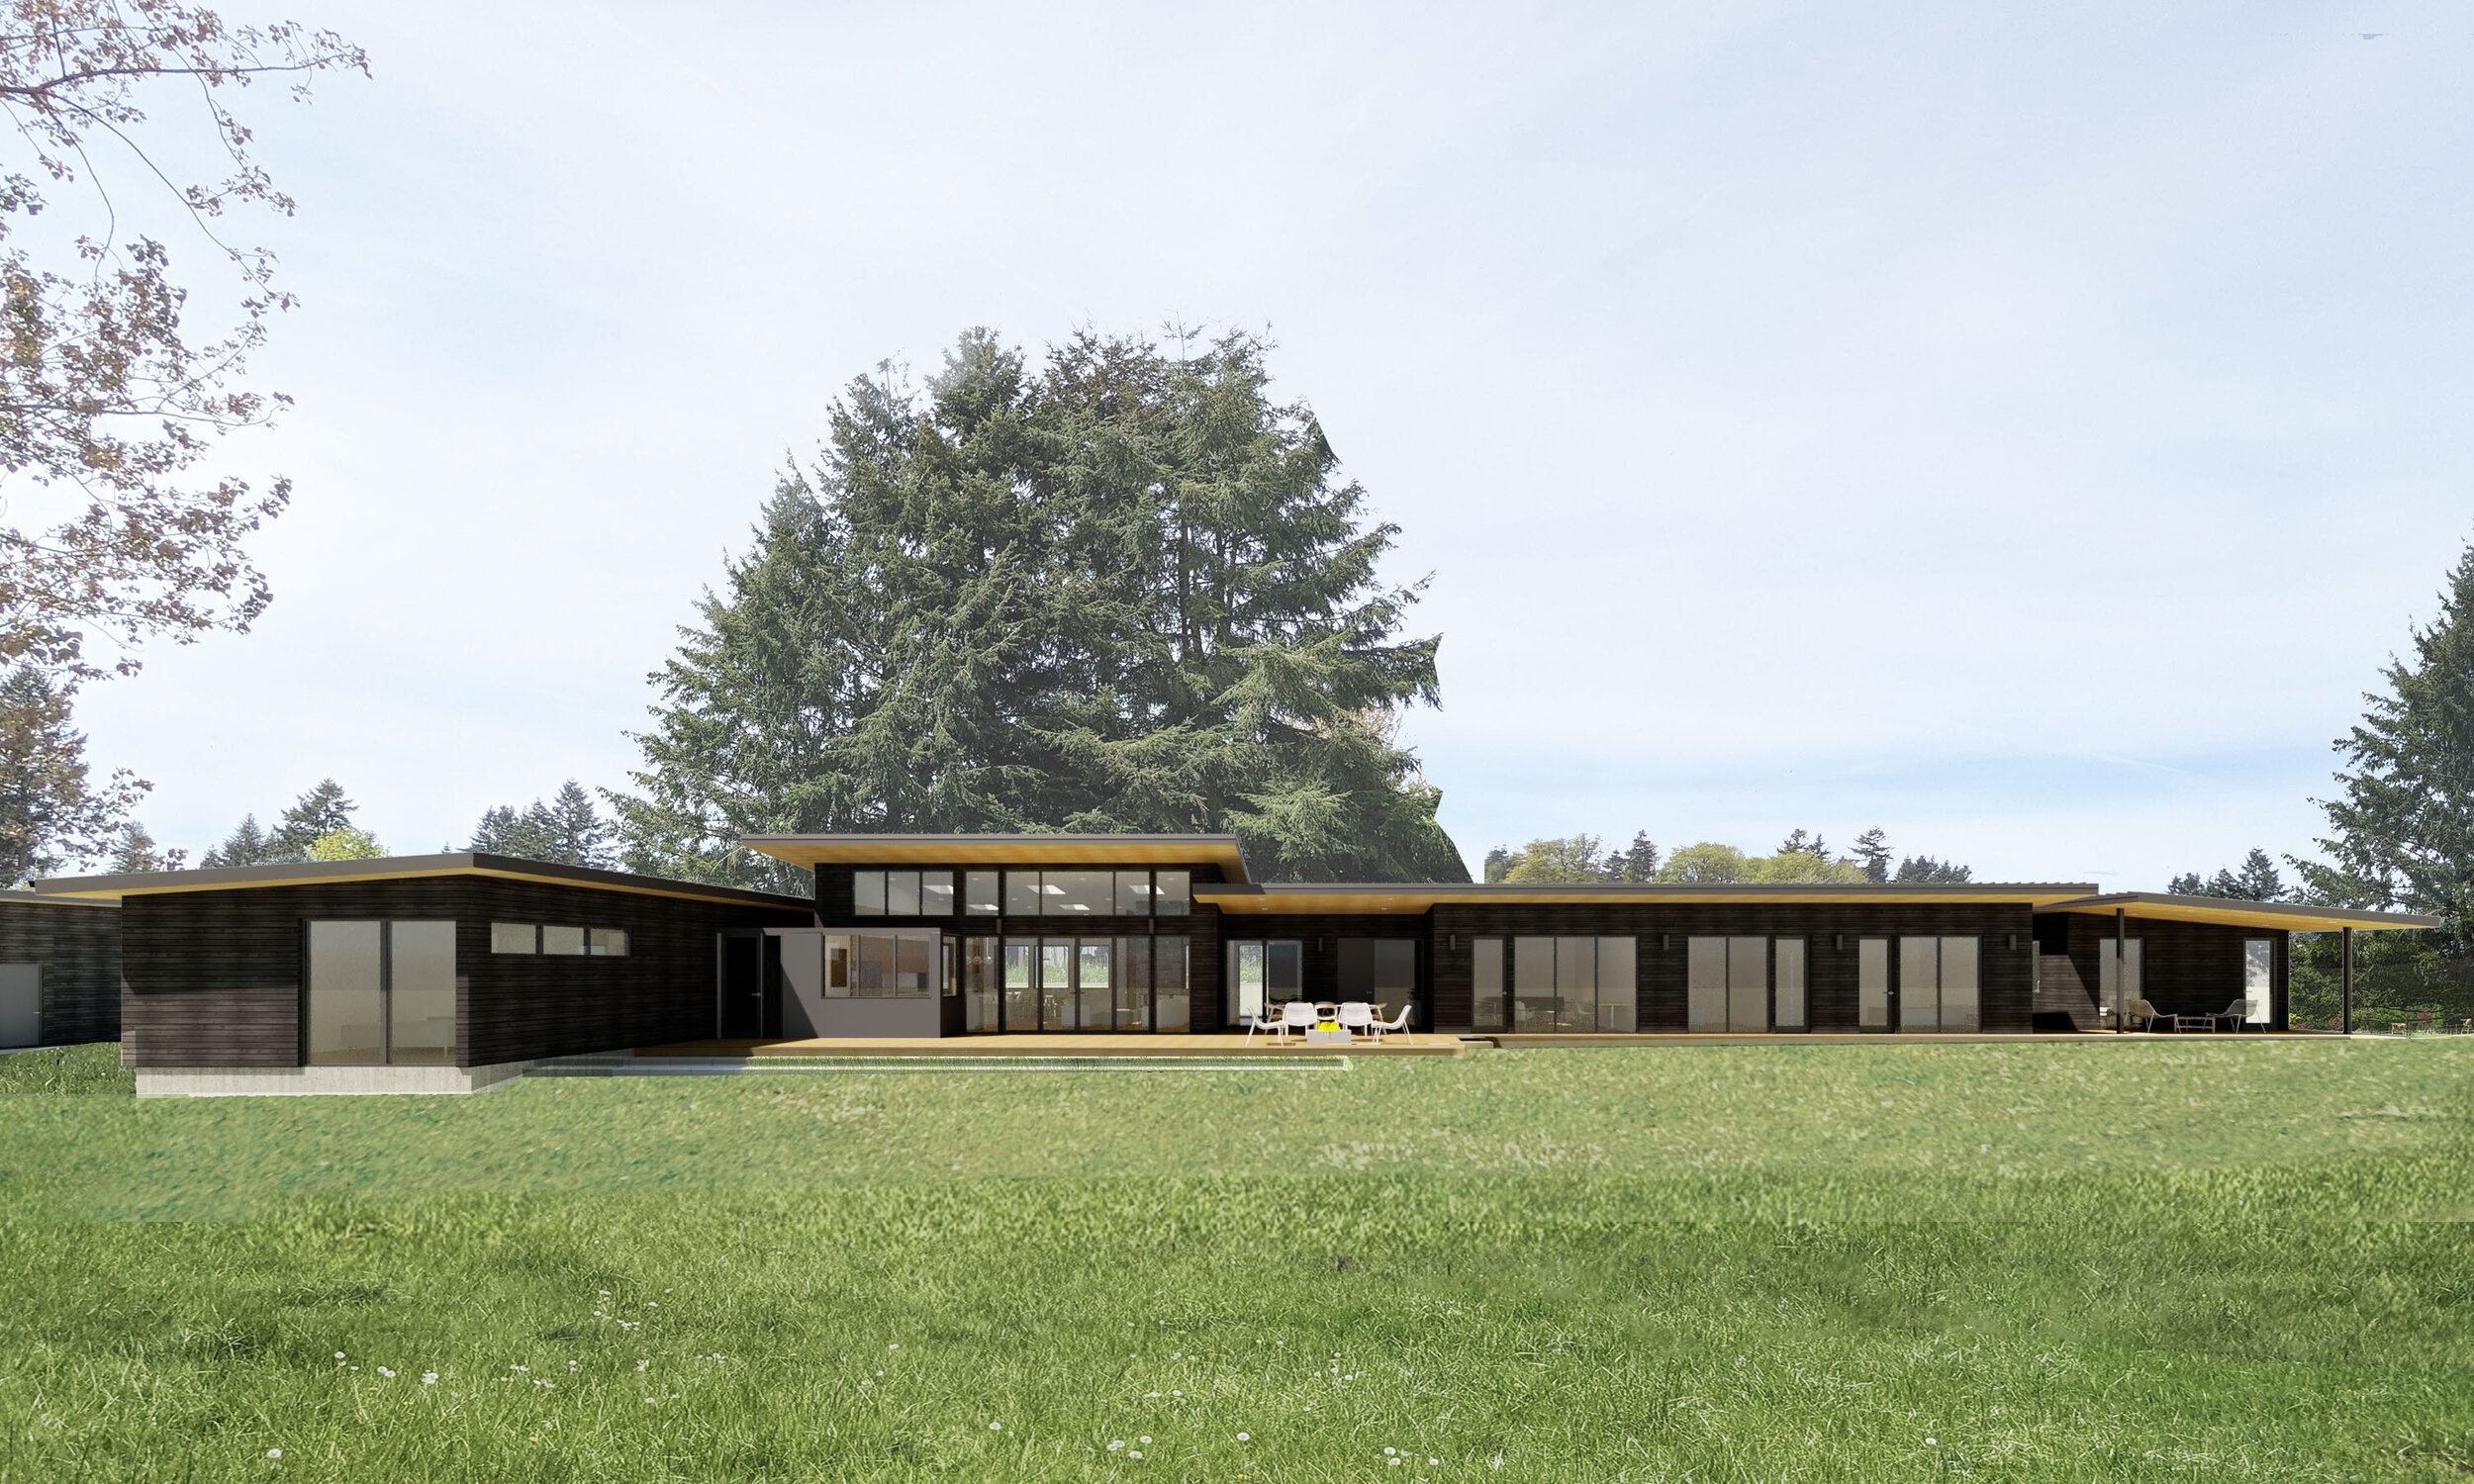  Portland architecture firm Propel Studio created this schematic design of a custom modern home to be located in the portland oregon metro region 